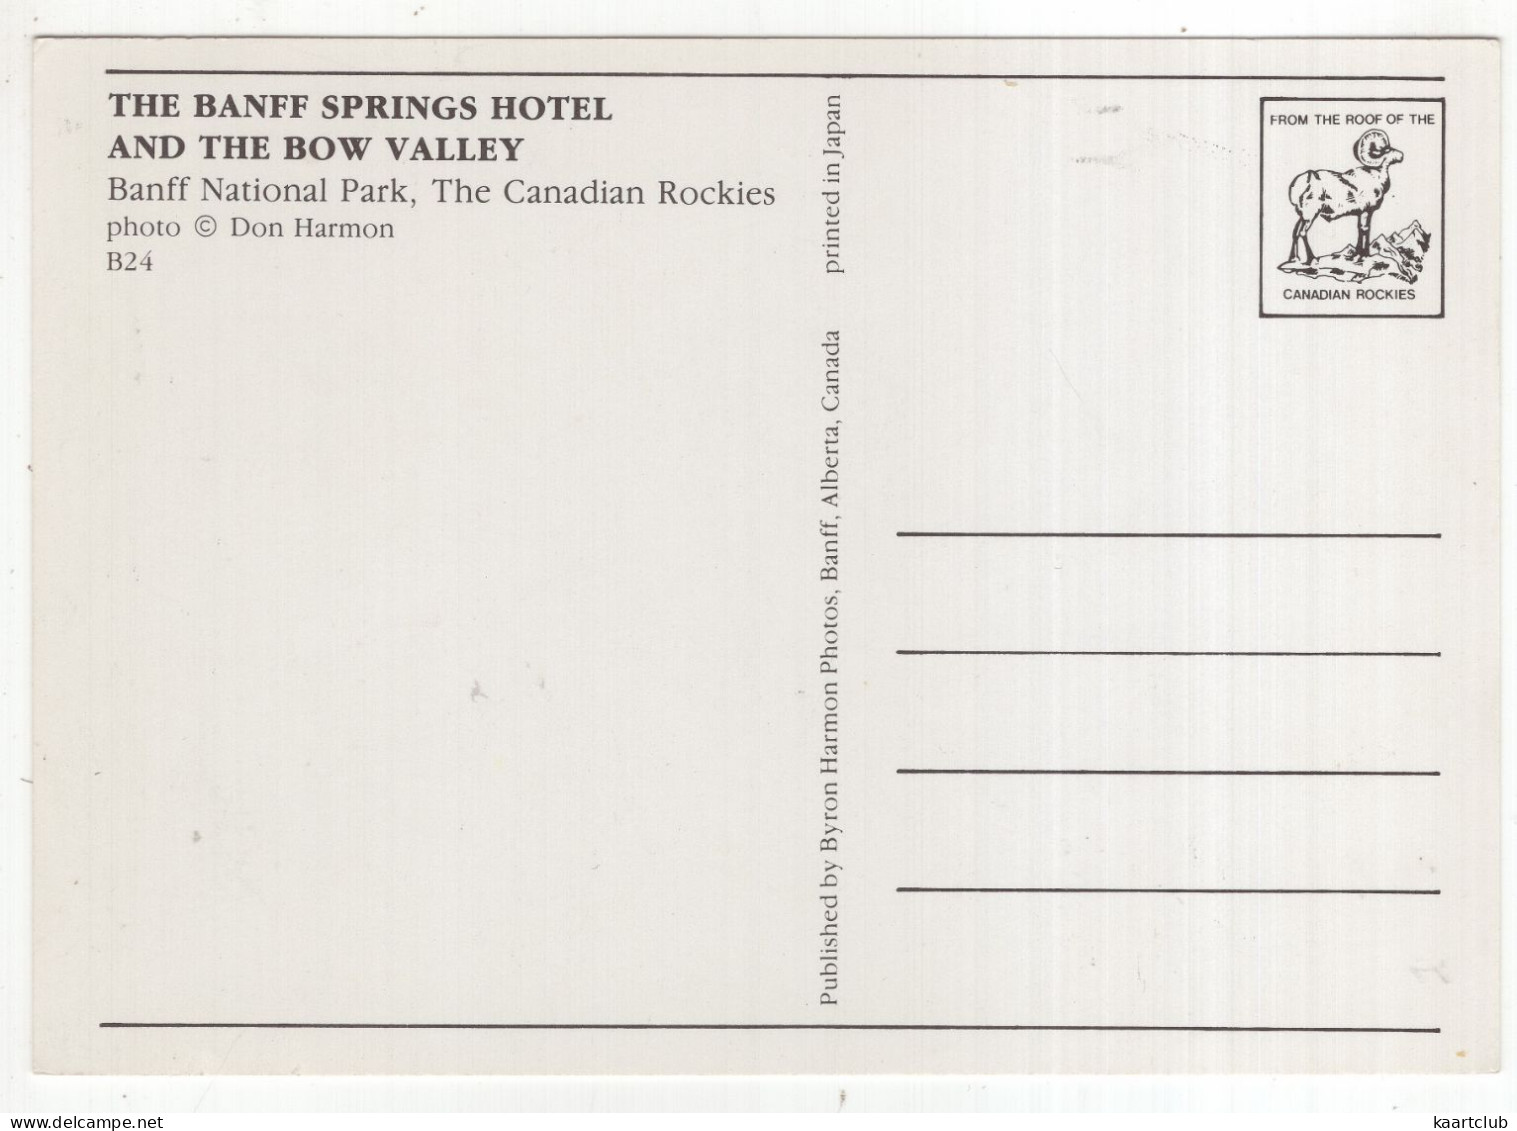 The Banff Springs Hotel And The Bow Valley - Banff National Park, The Canadian Rockies - Banff